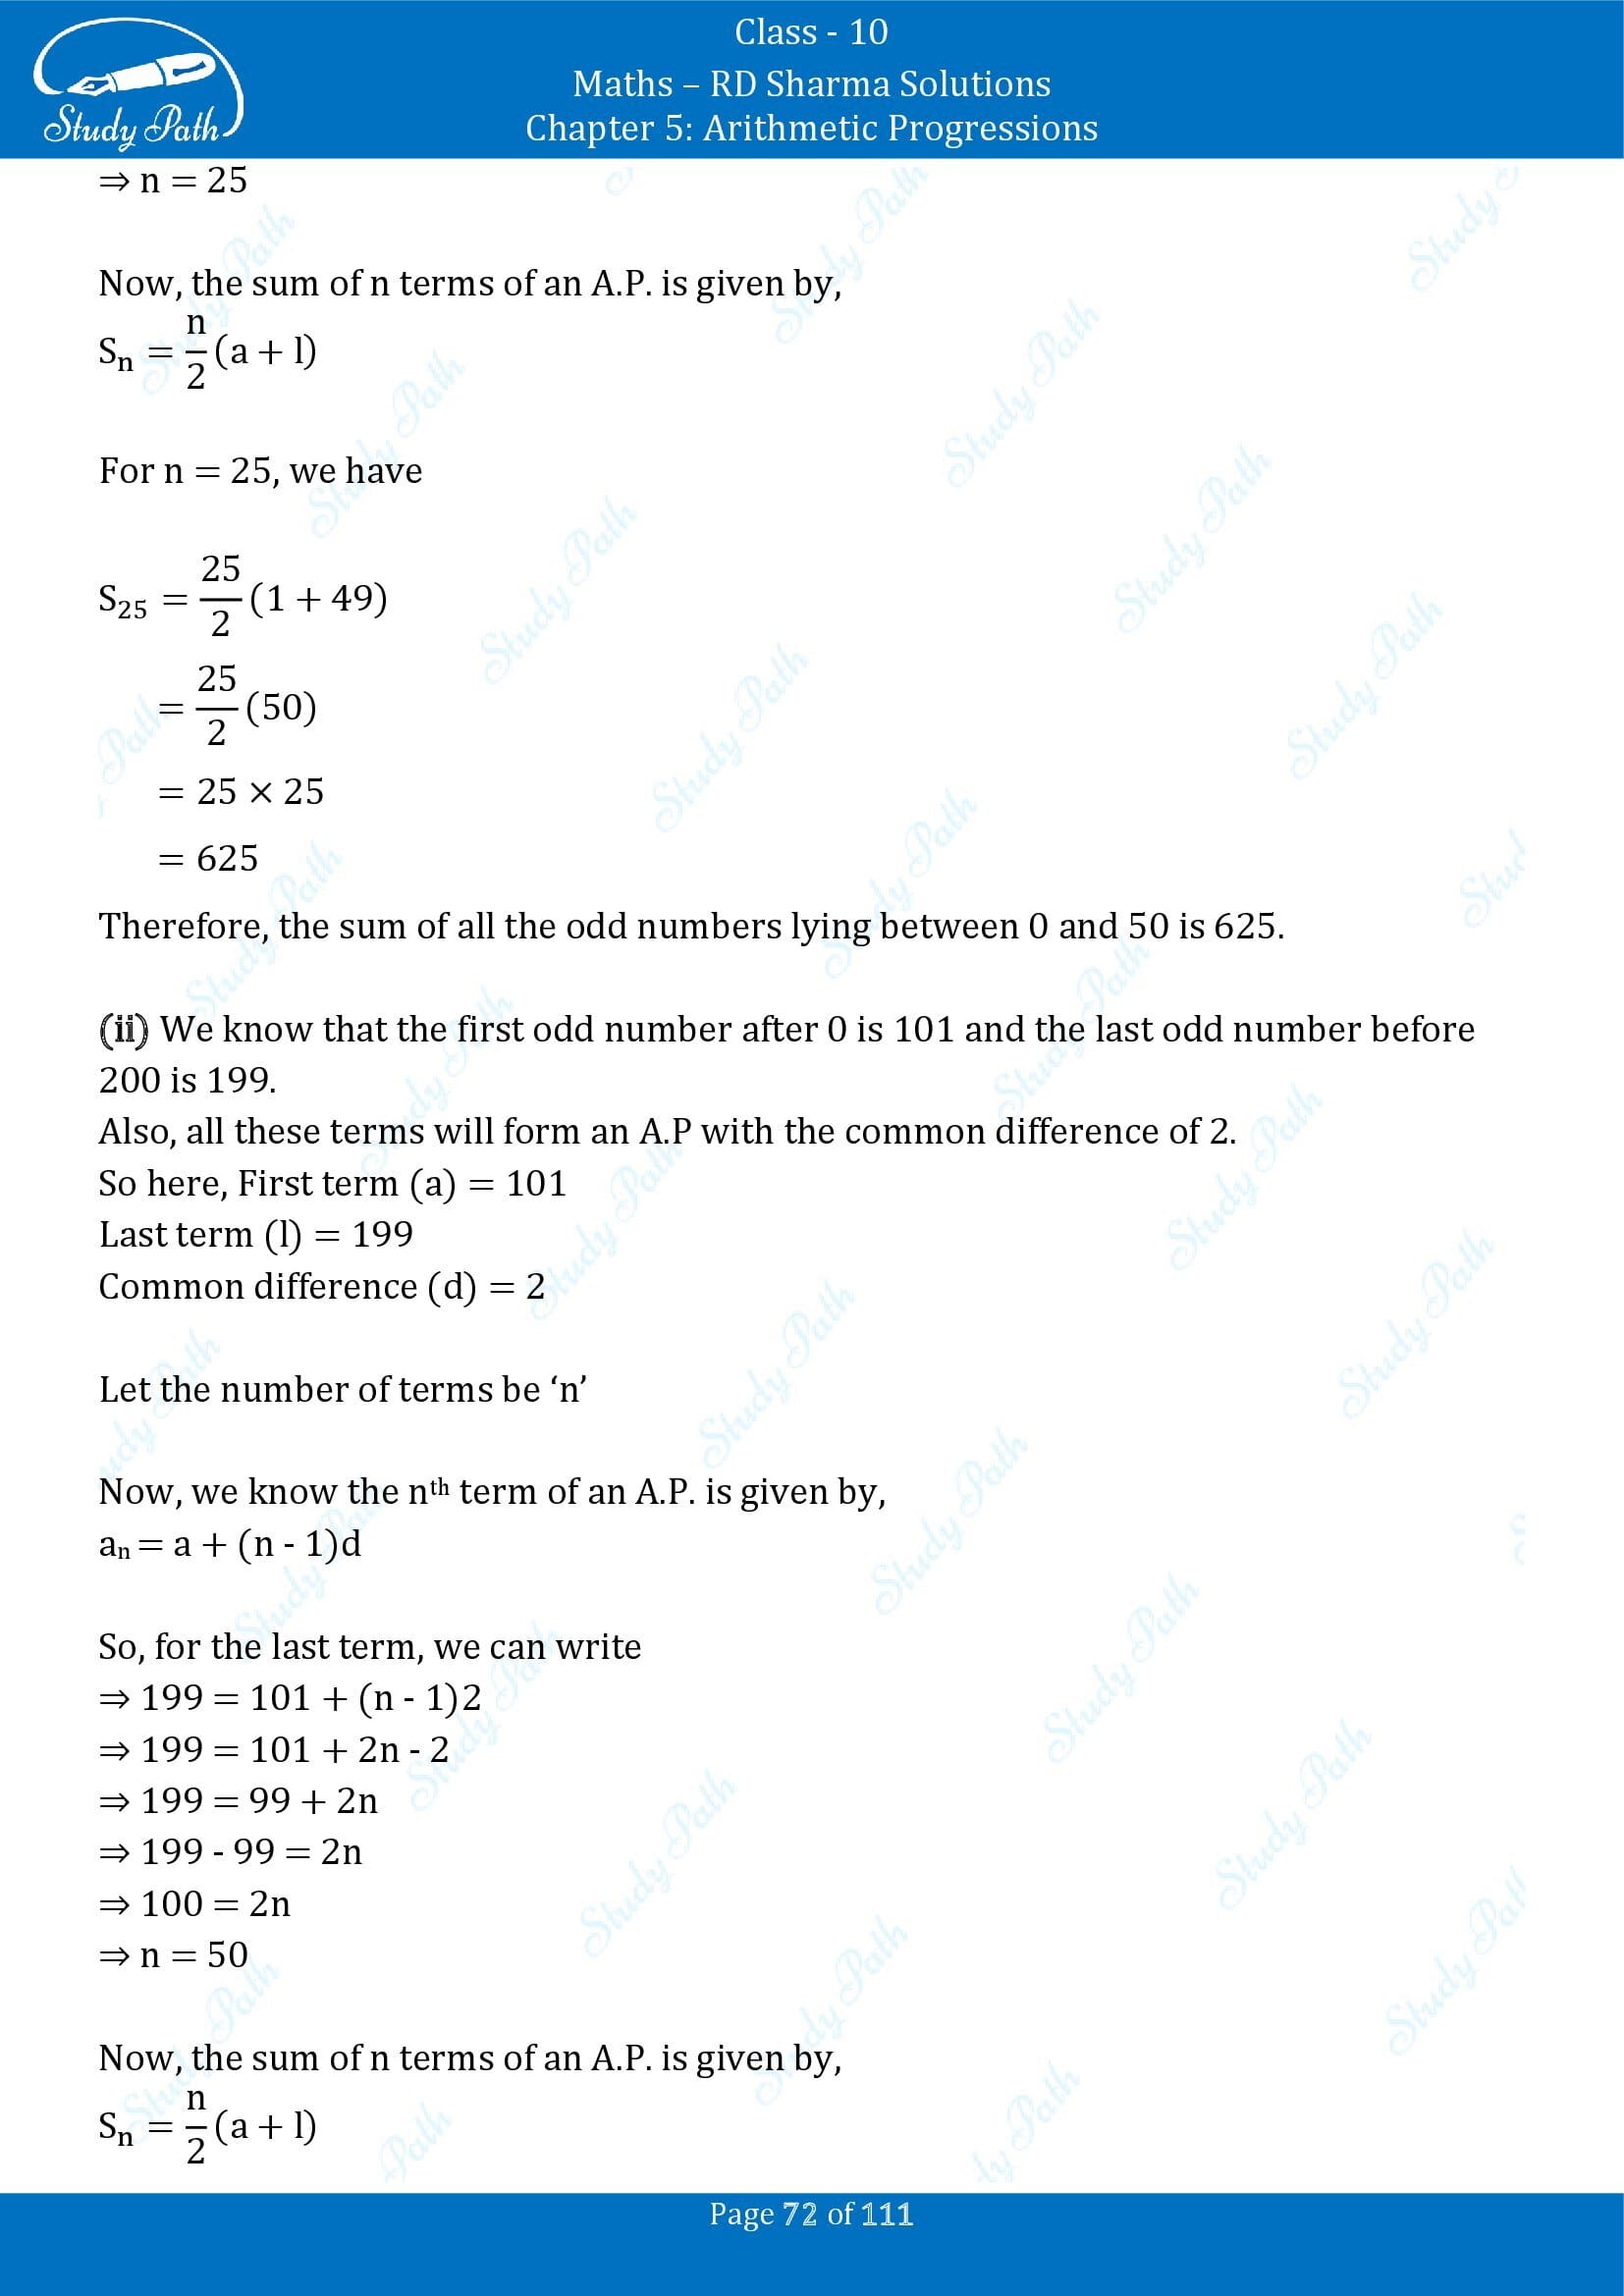 RD Sharma Solutions Class 10 Chapter 5 Arithmetic Progressions Exercise 5.6 00072